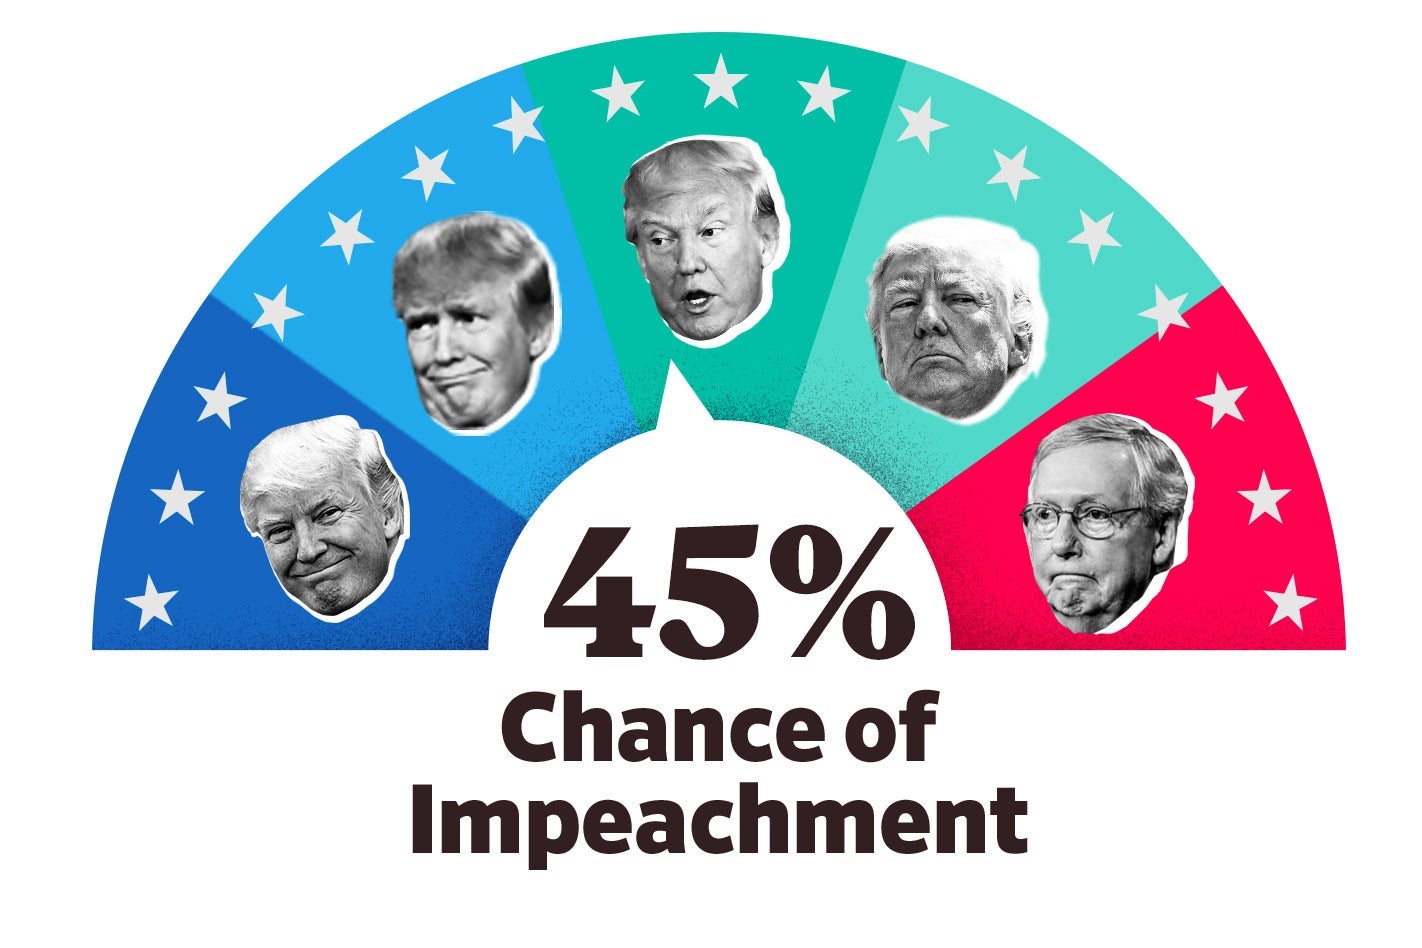 The "Impeach-O-Meter" graphic, which registers a 45 percent likelihood of impeachment.